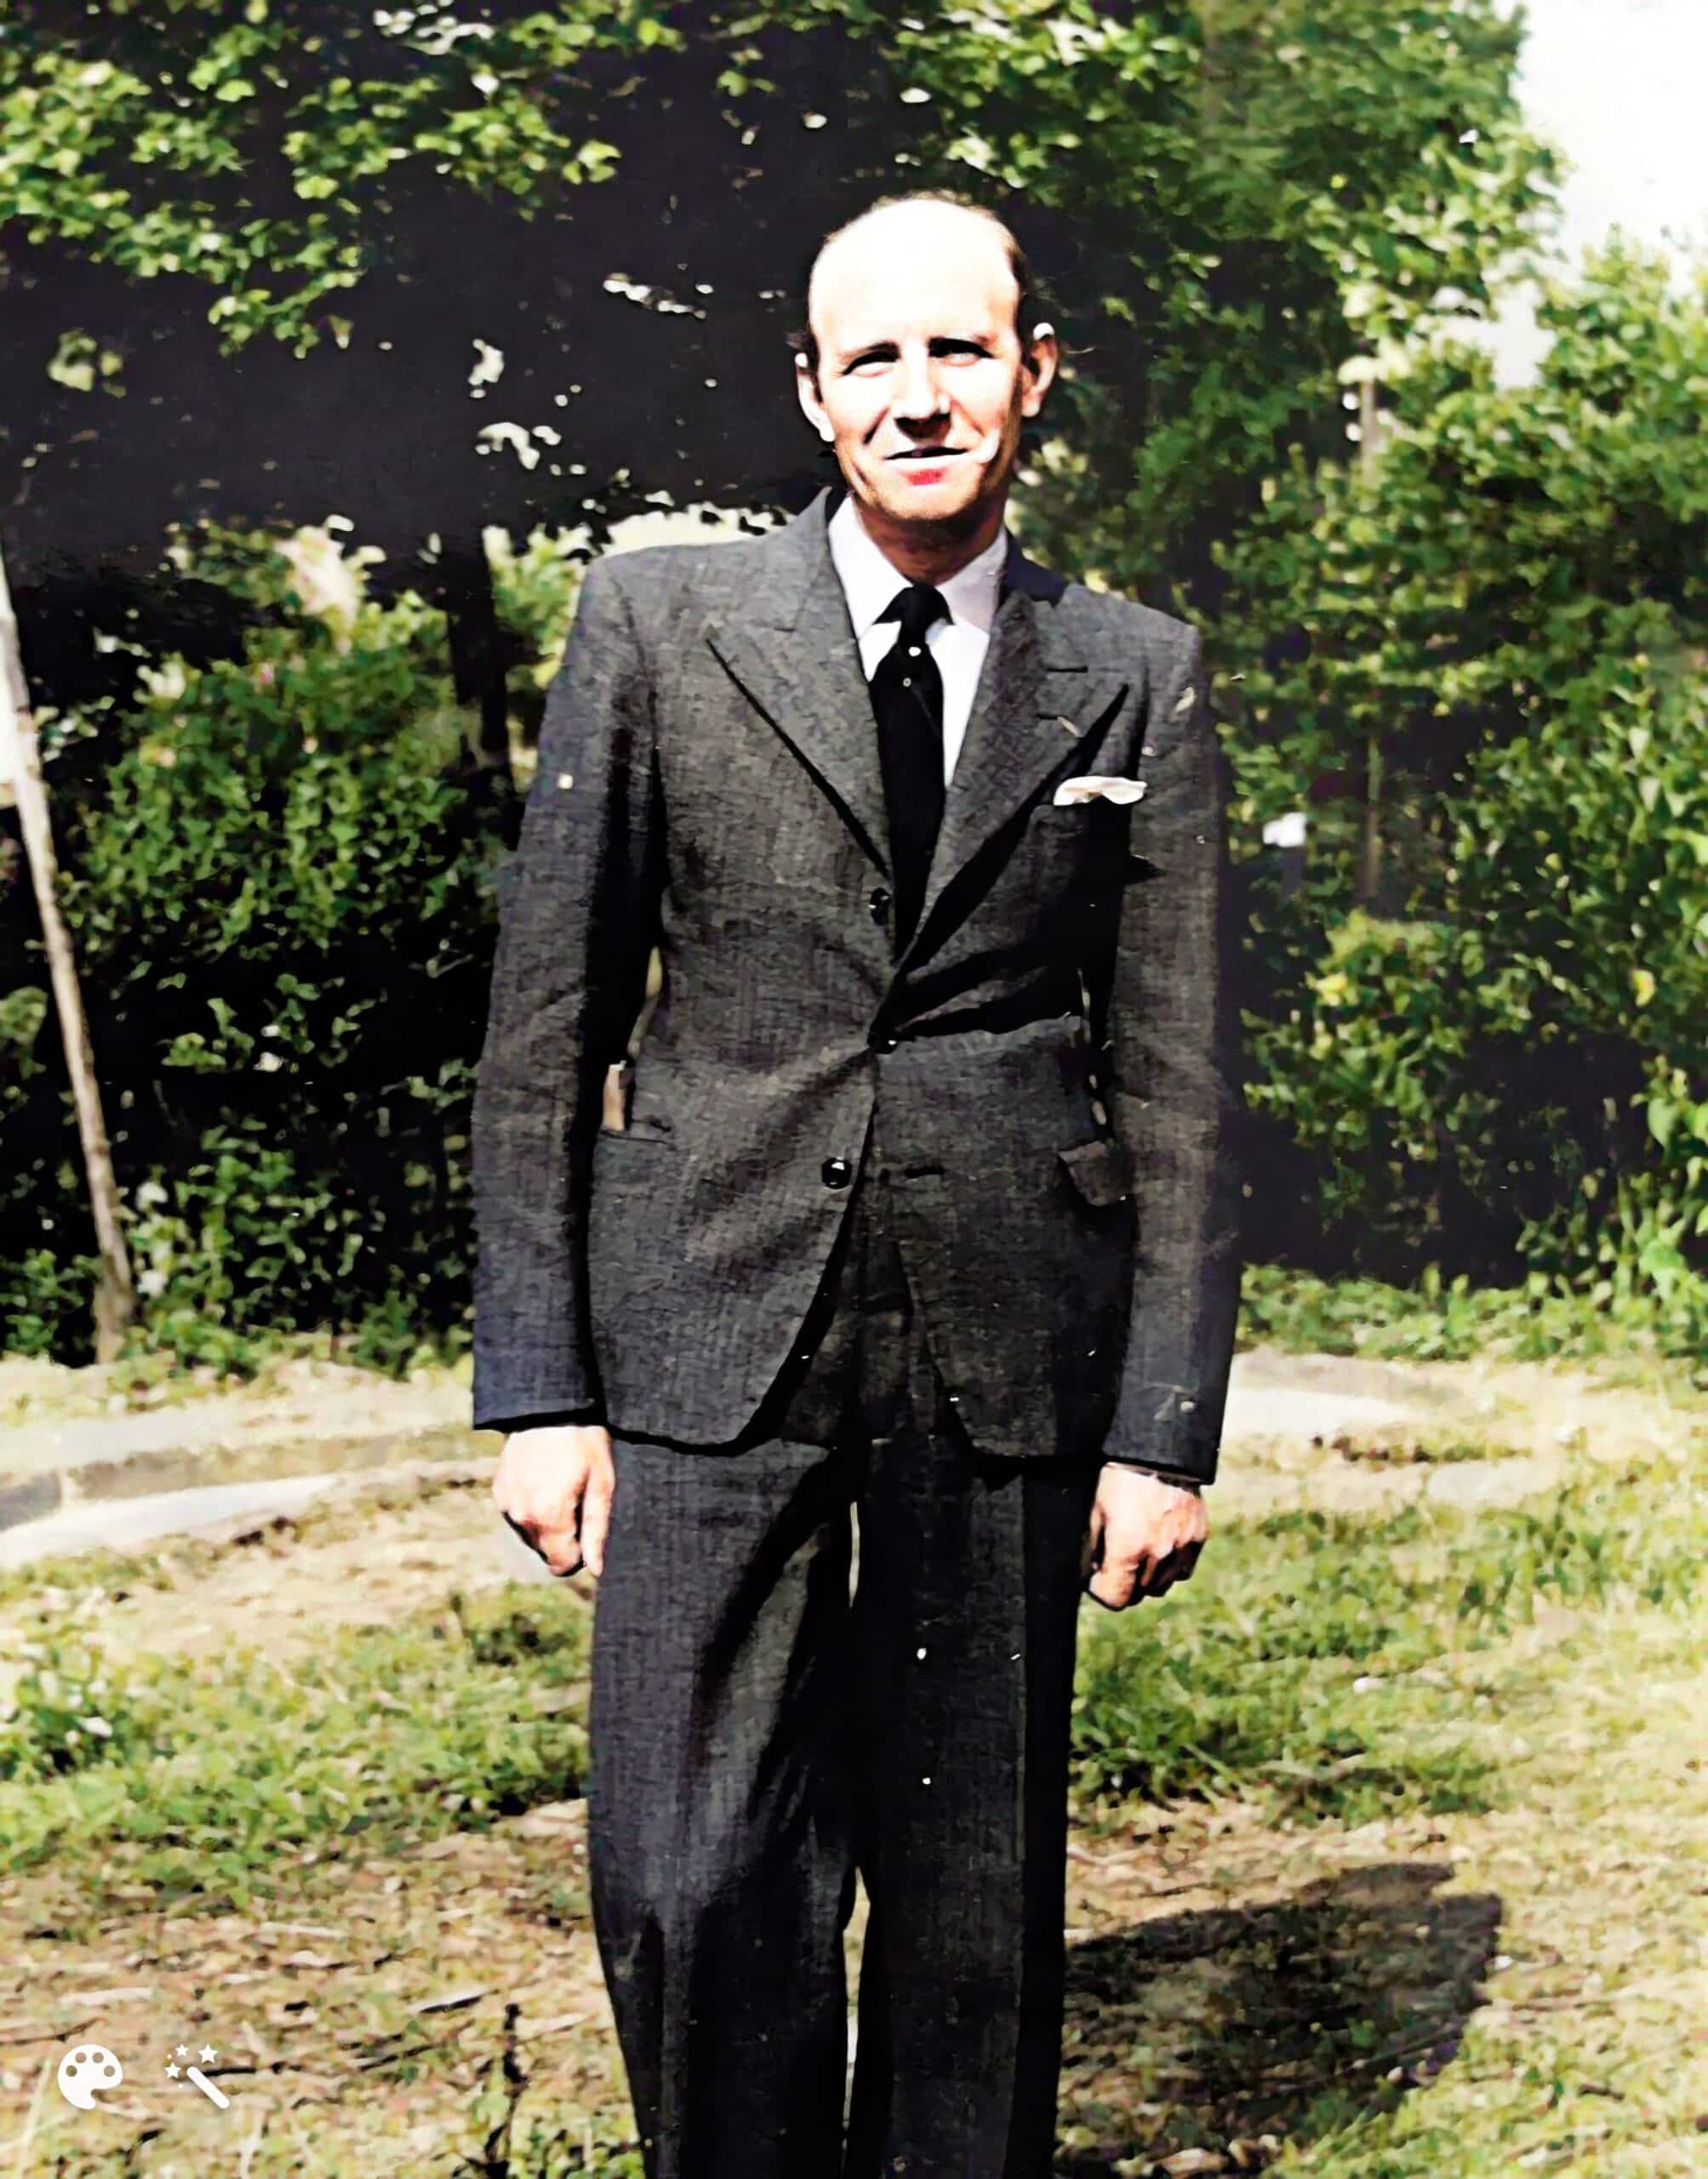 Georges Bourlet. Photo colorized and enhanced by MyHeritage